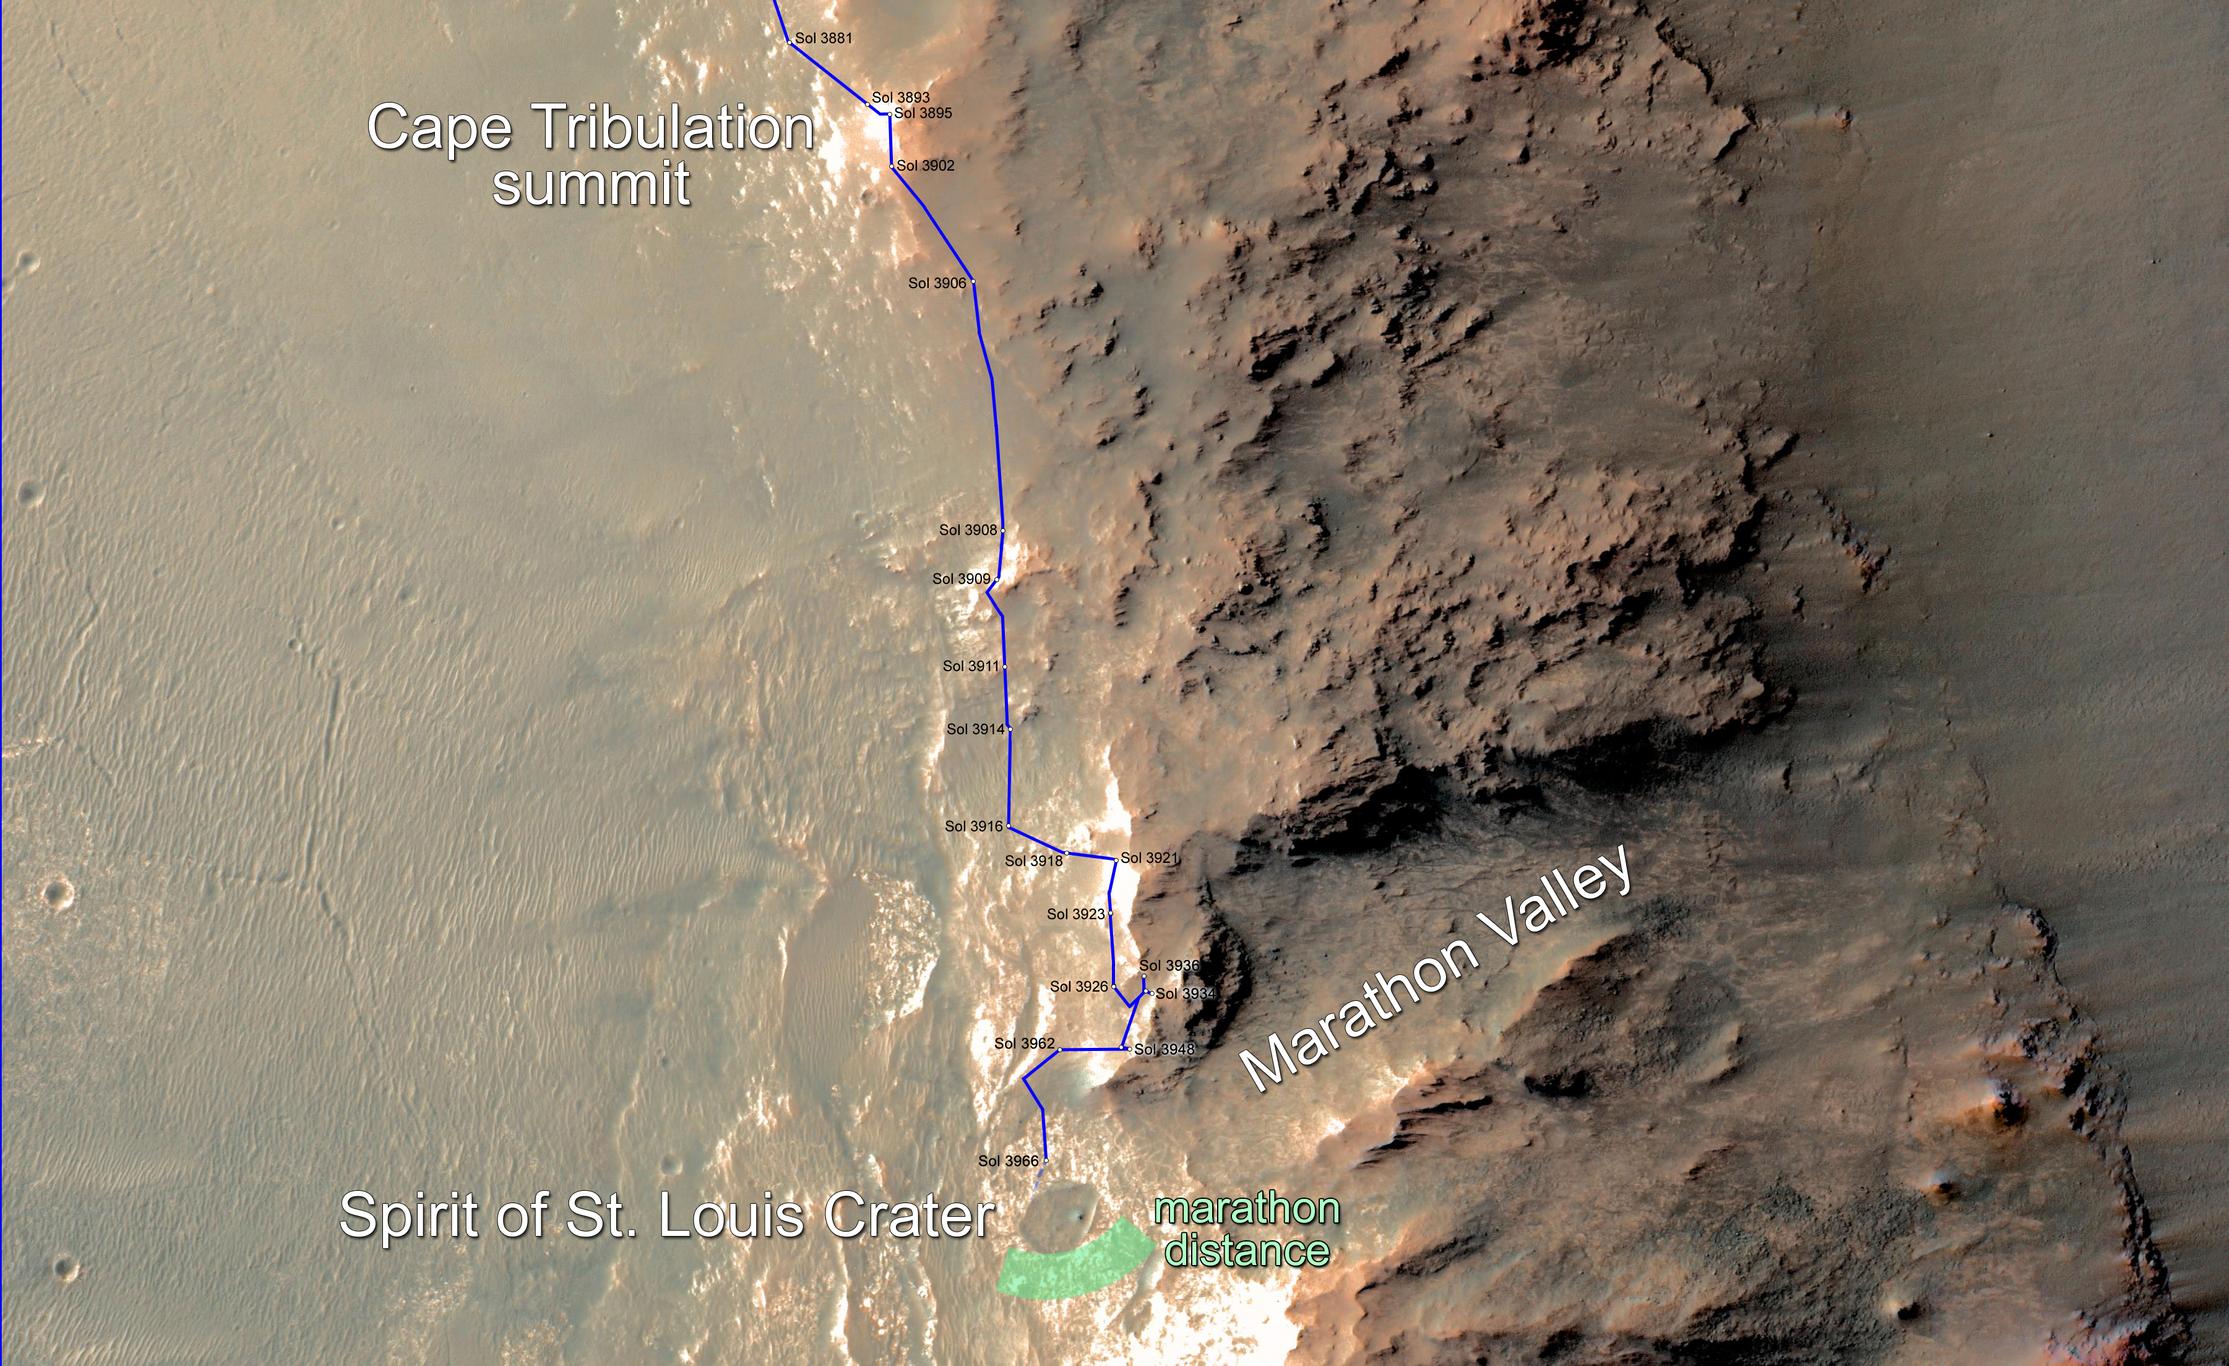 This map updates progress that NASA's Mars Exploration Rover Opportunity is making toward reaching a driving distance equivalent to a marathon footrace. It indicates the rover's position on March 23, 2015, relative to where it could surpass that distance.